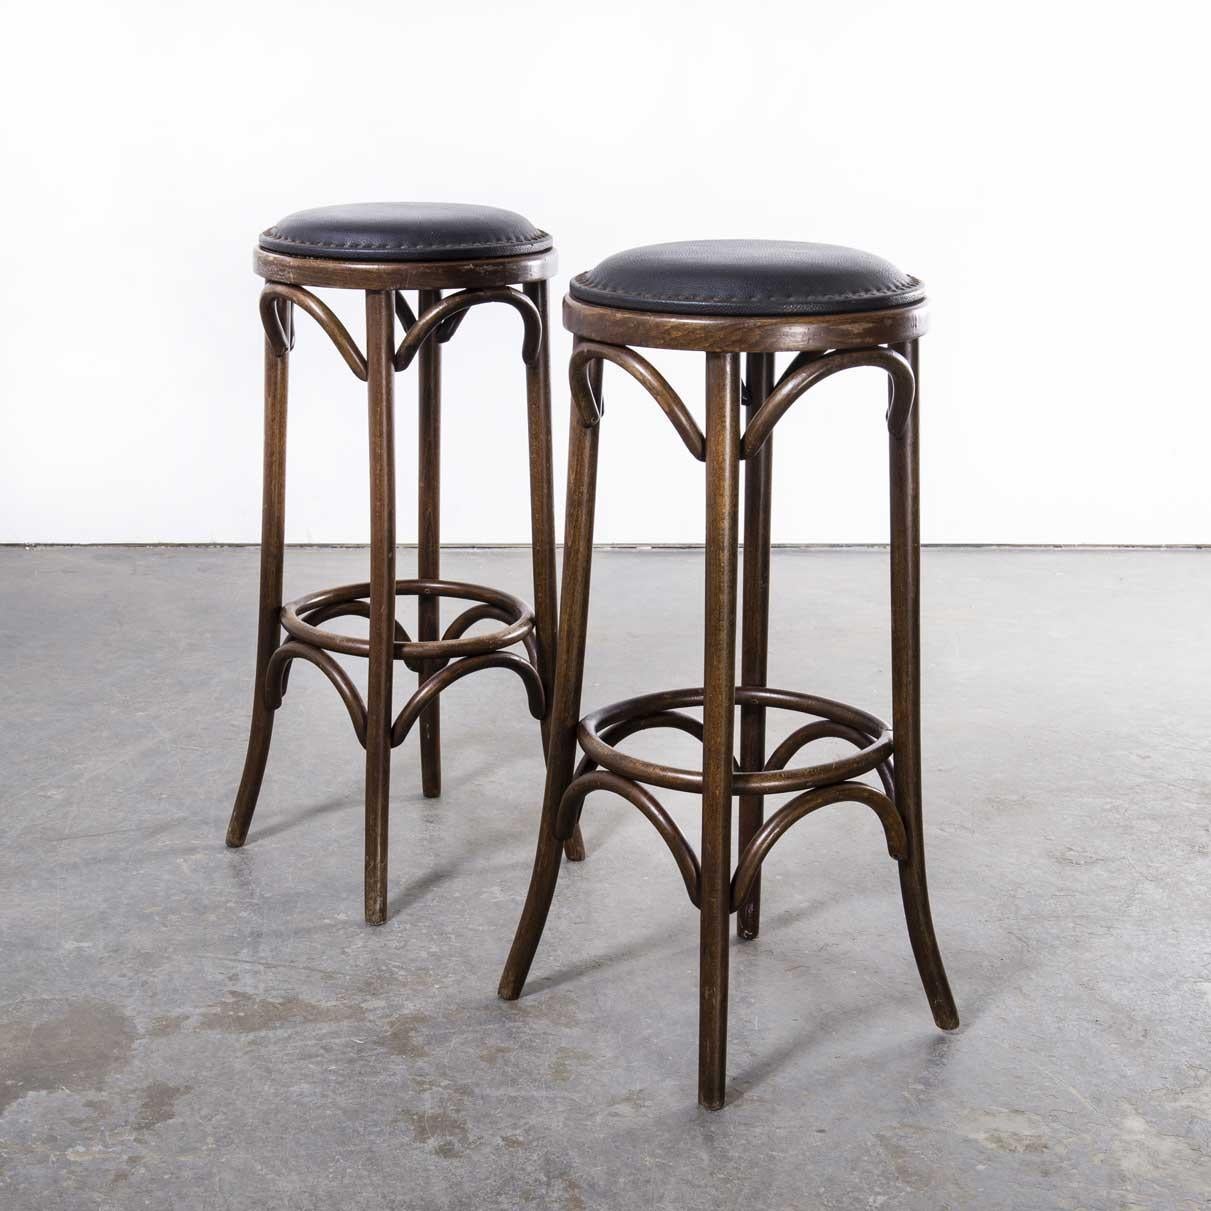 1950’s Baumann Upholstered Bar Stools – Pair
1950’s Baumann Upholstered Bar Stools – Pair. Made by the maker Baumann. Baumann is a slightly off the radar French producer just starting to gain traction in the market. Baumann was founded in 1901, by